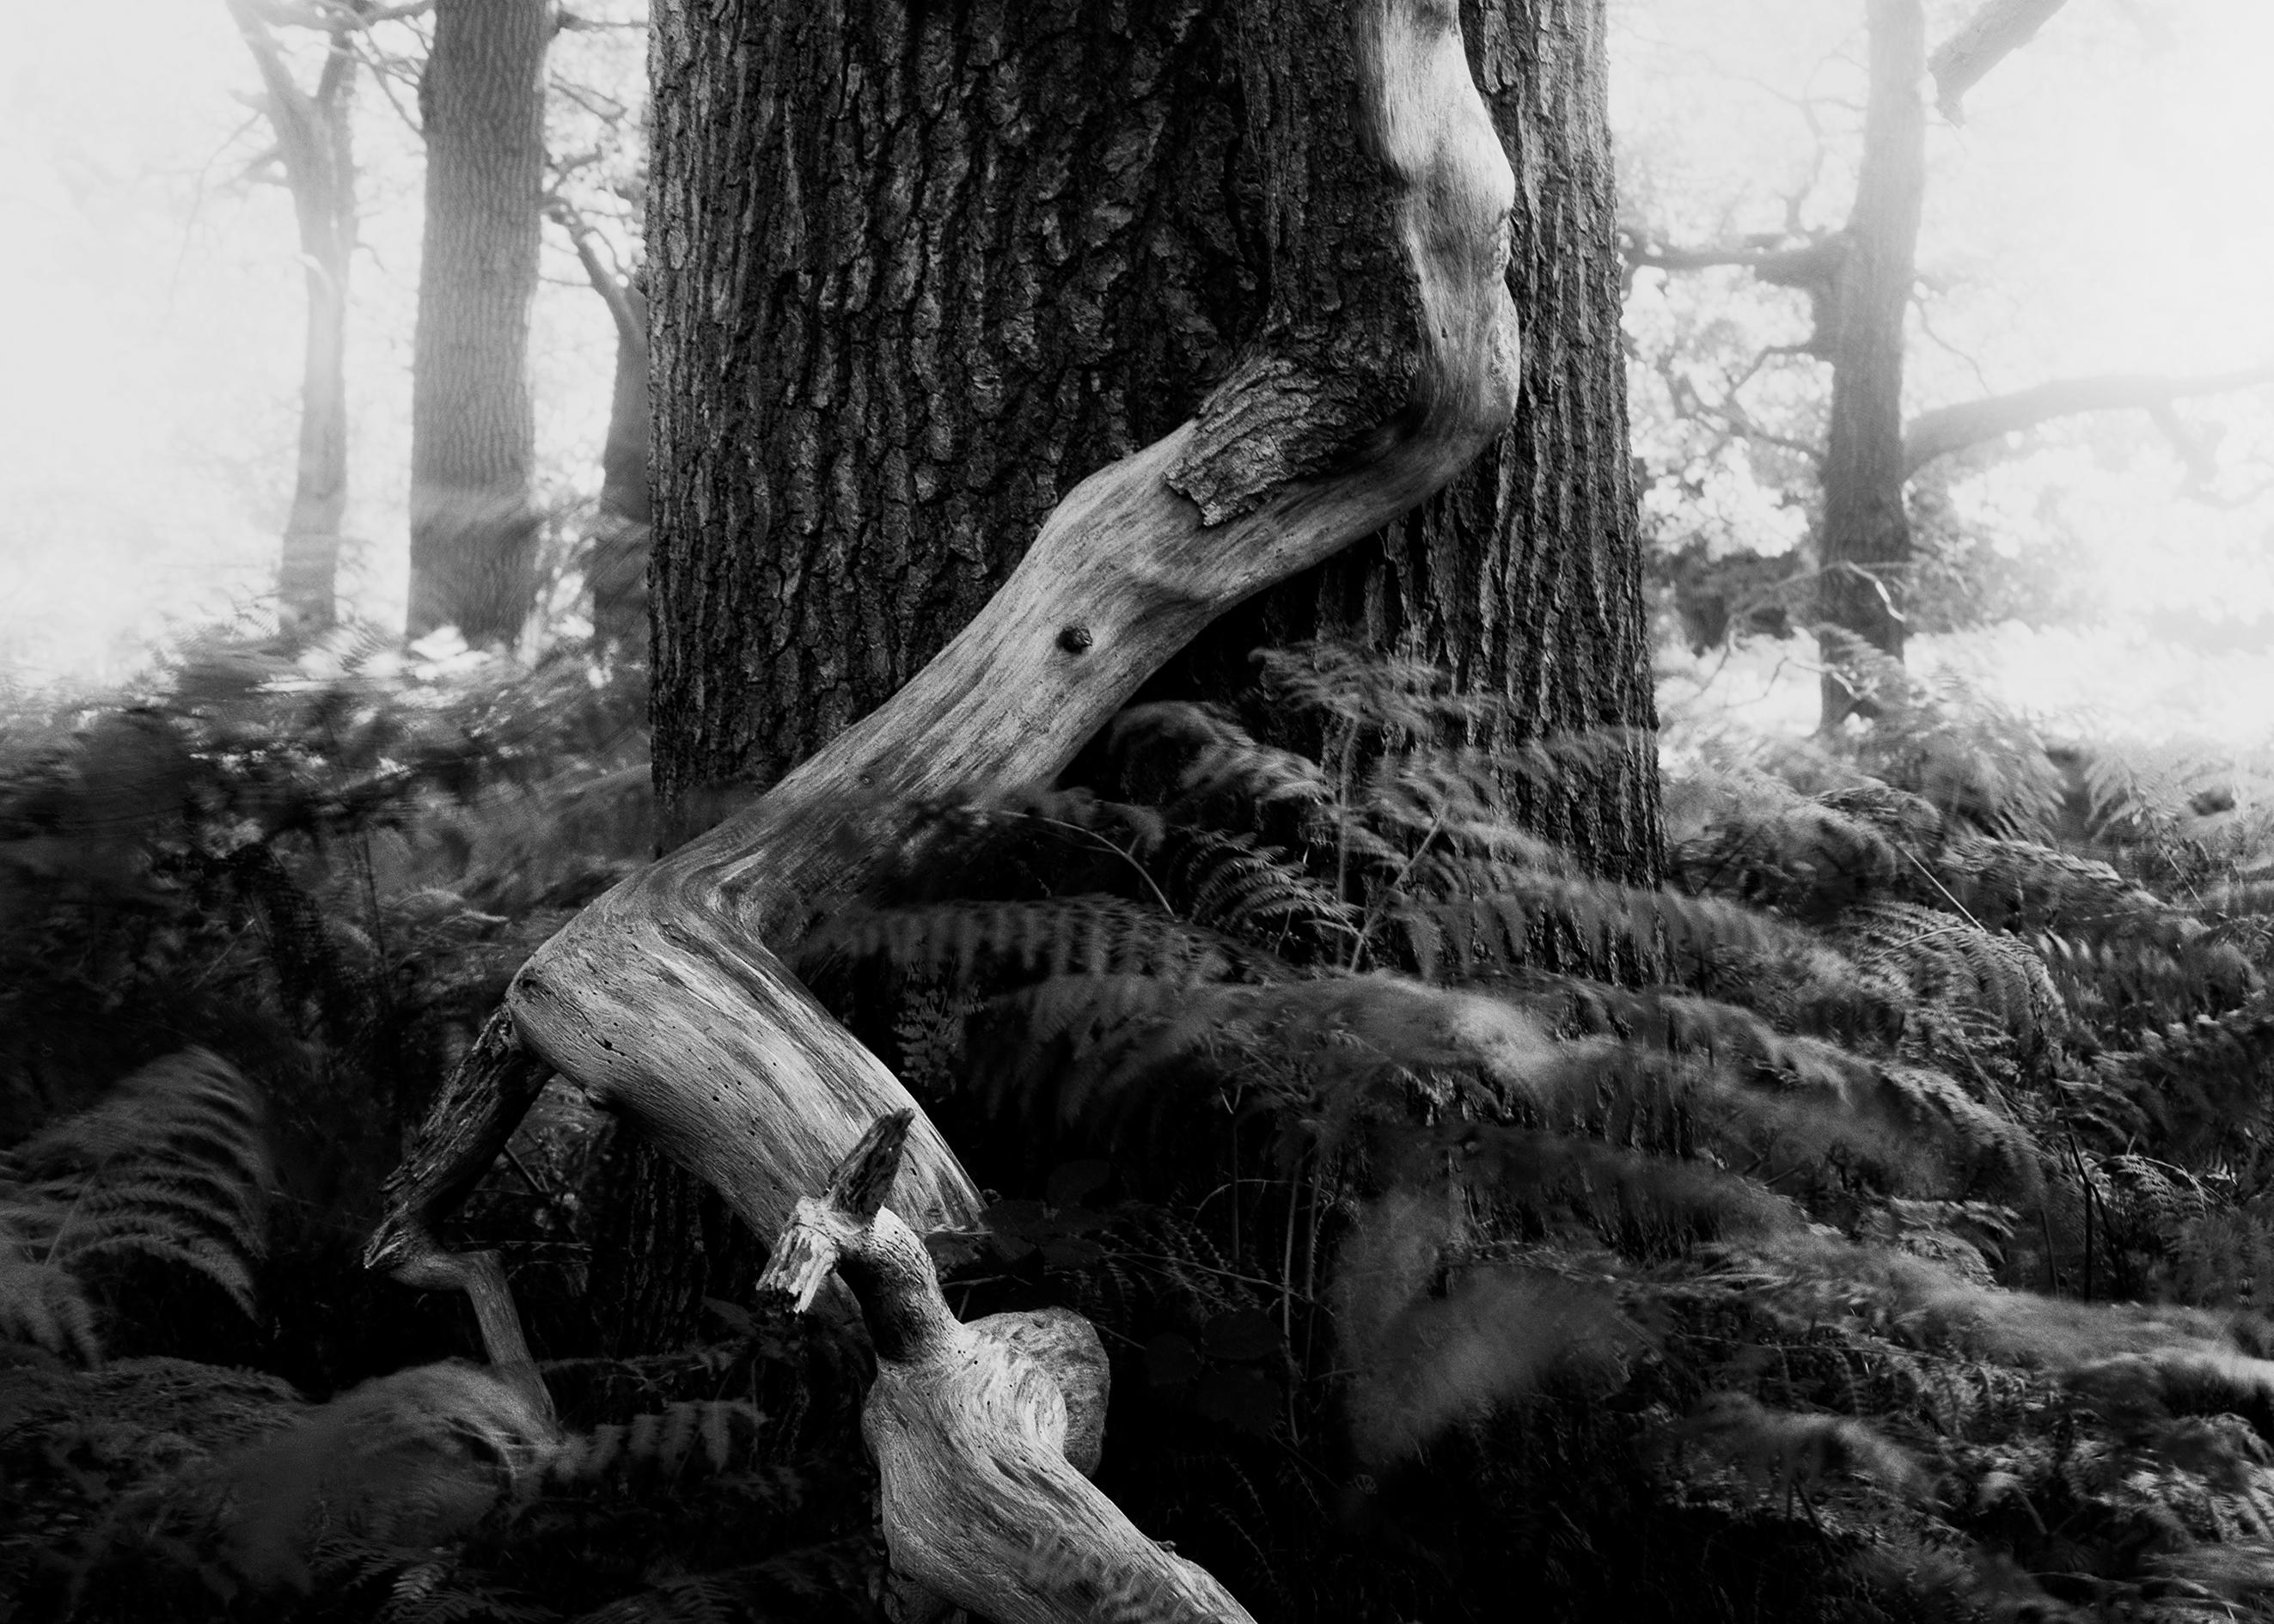 Ugne Pouwell Landscape Photograph - Fallen - analogue black and white woodland photography, limited edition of 10